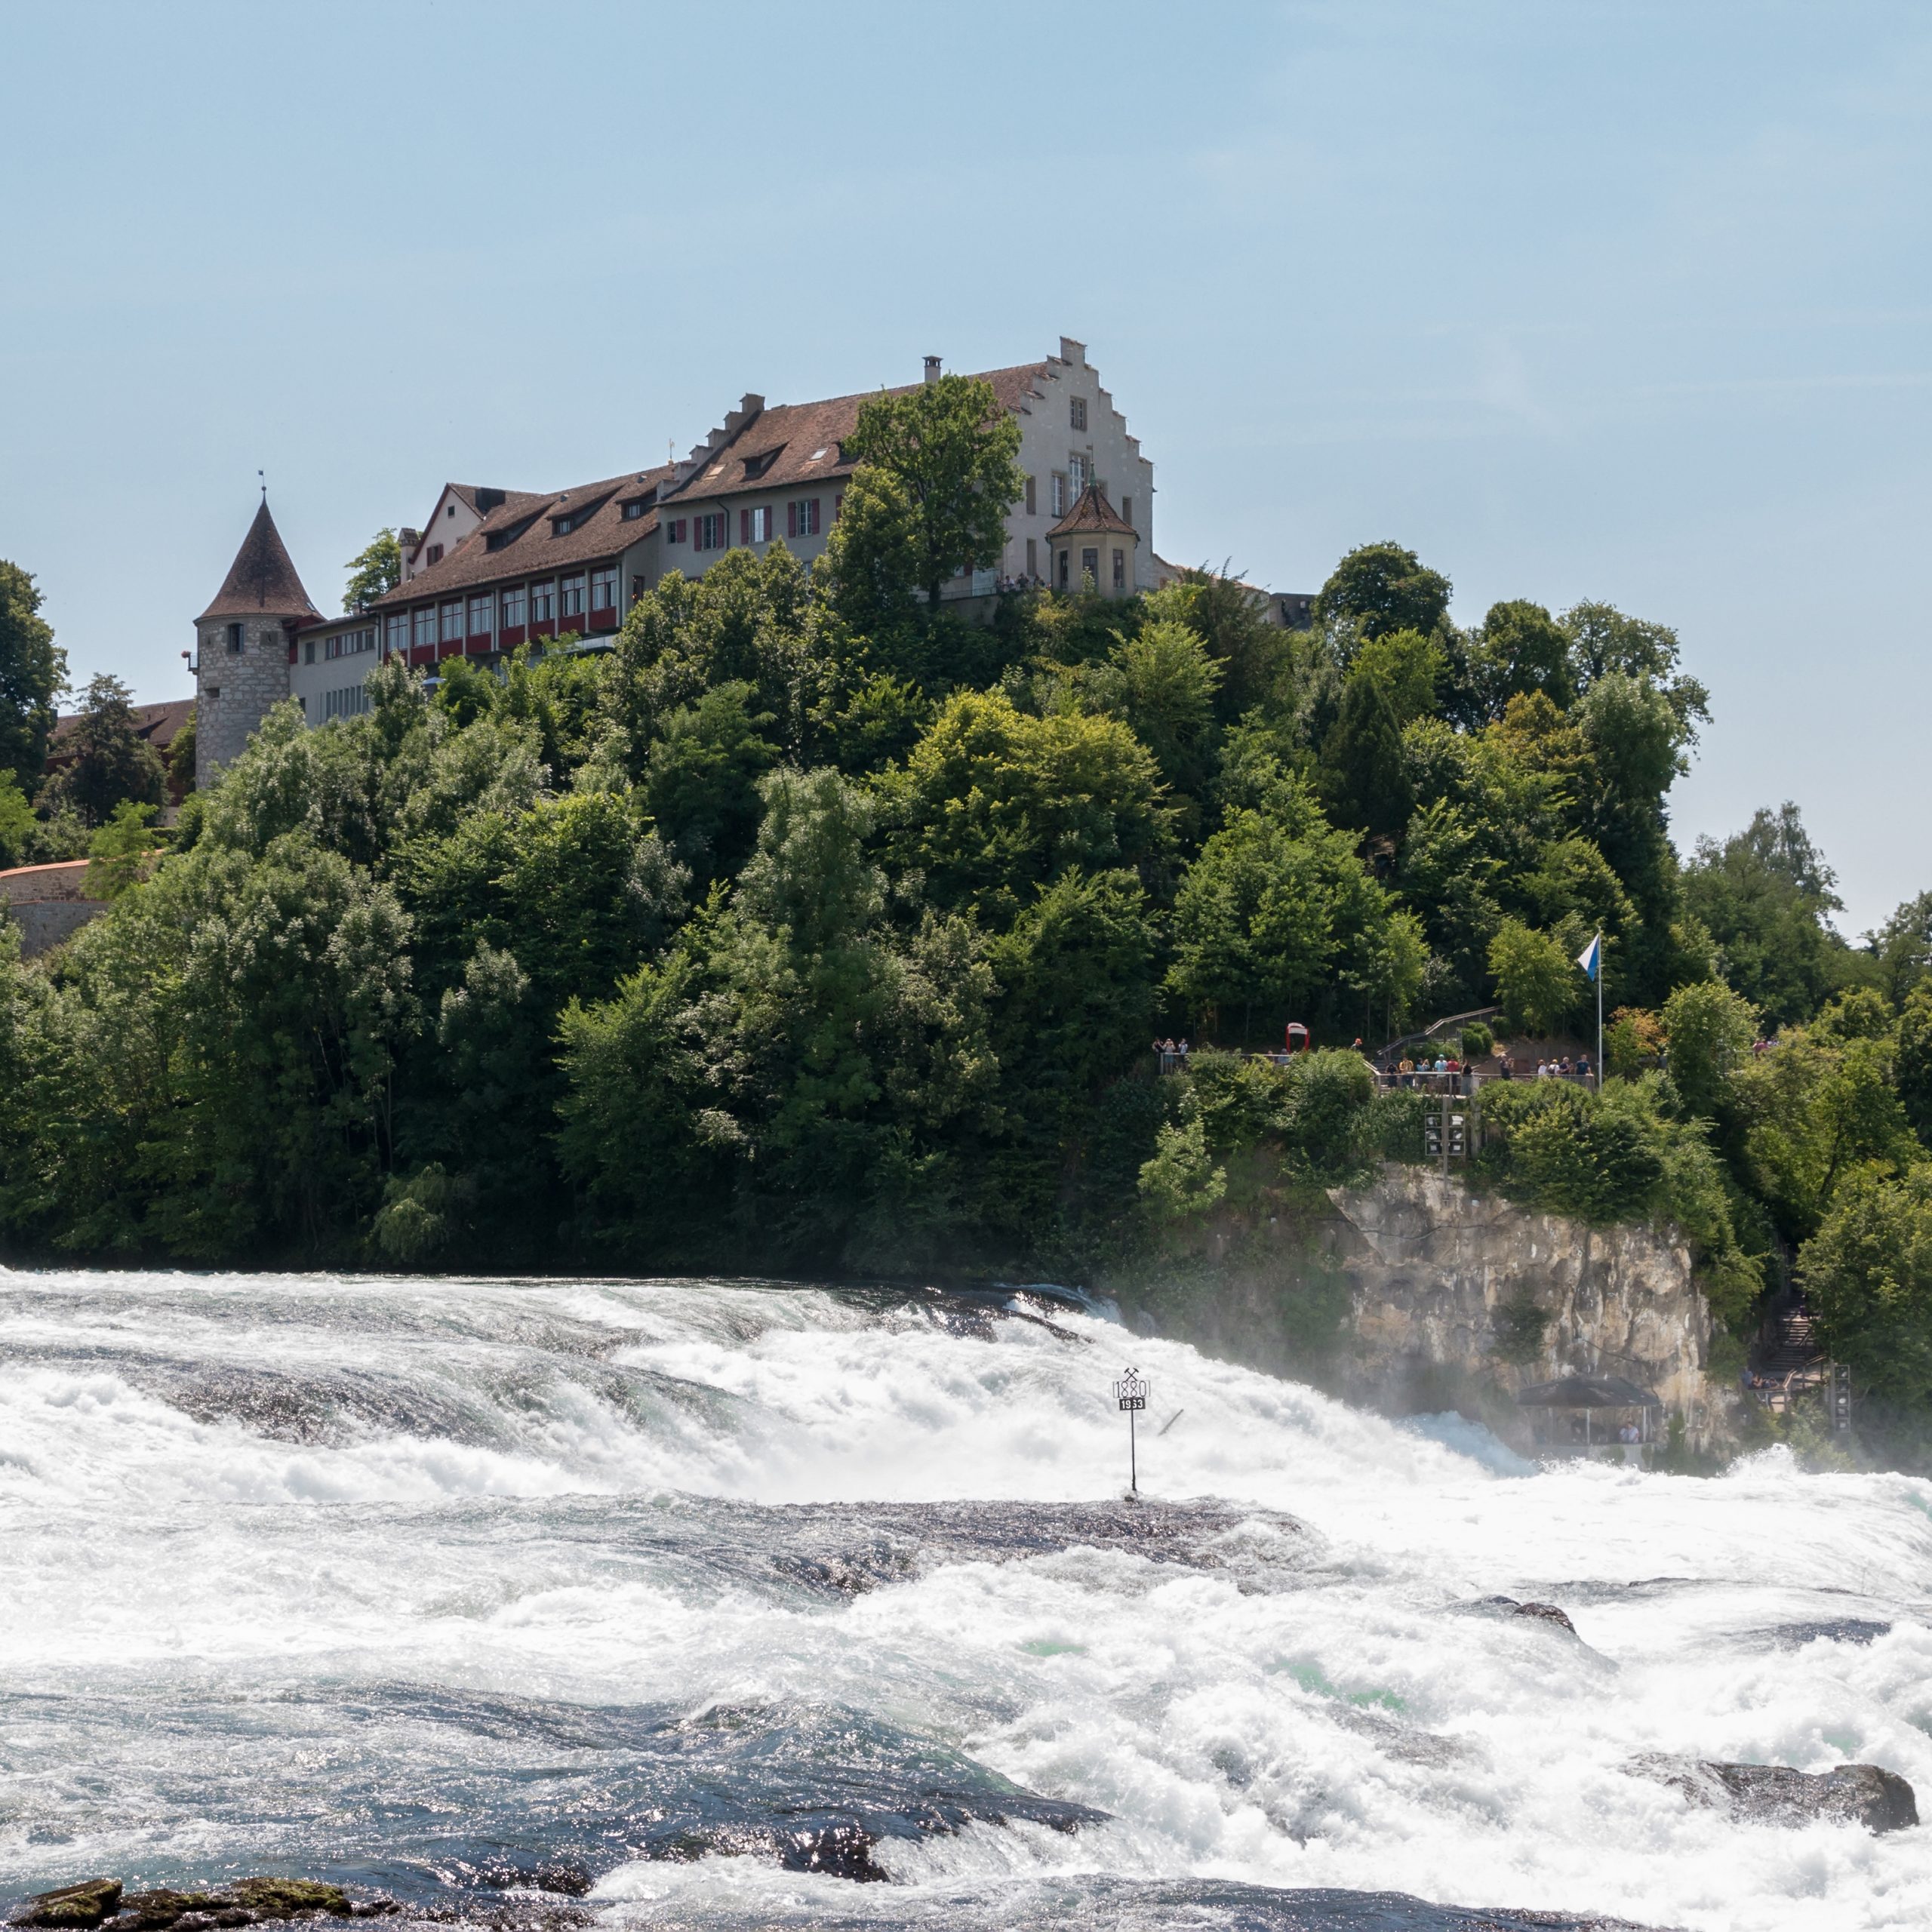 Day 04 - View the Rhine falls – Black Forest – Orientation tour of Heidelberg